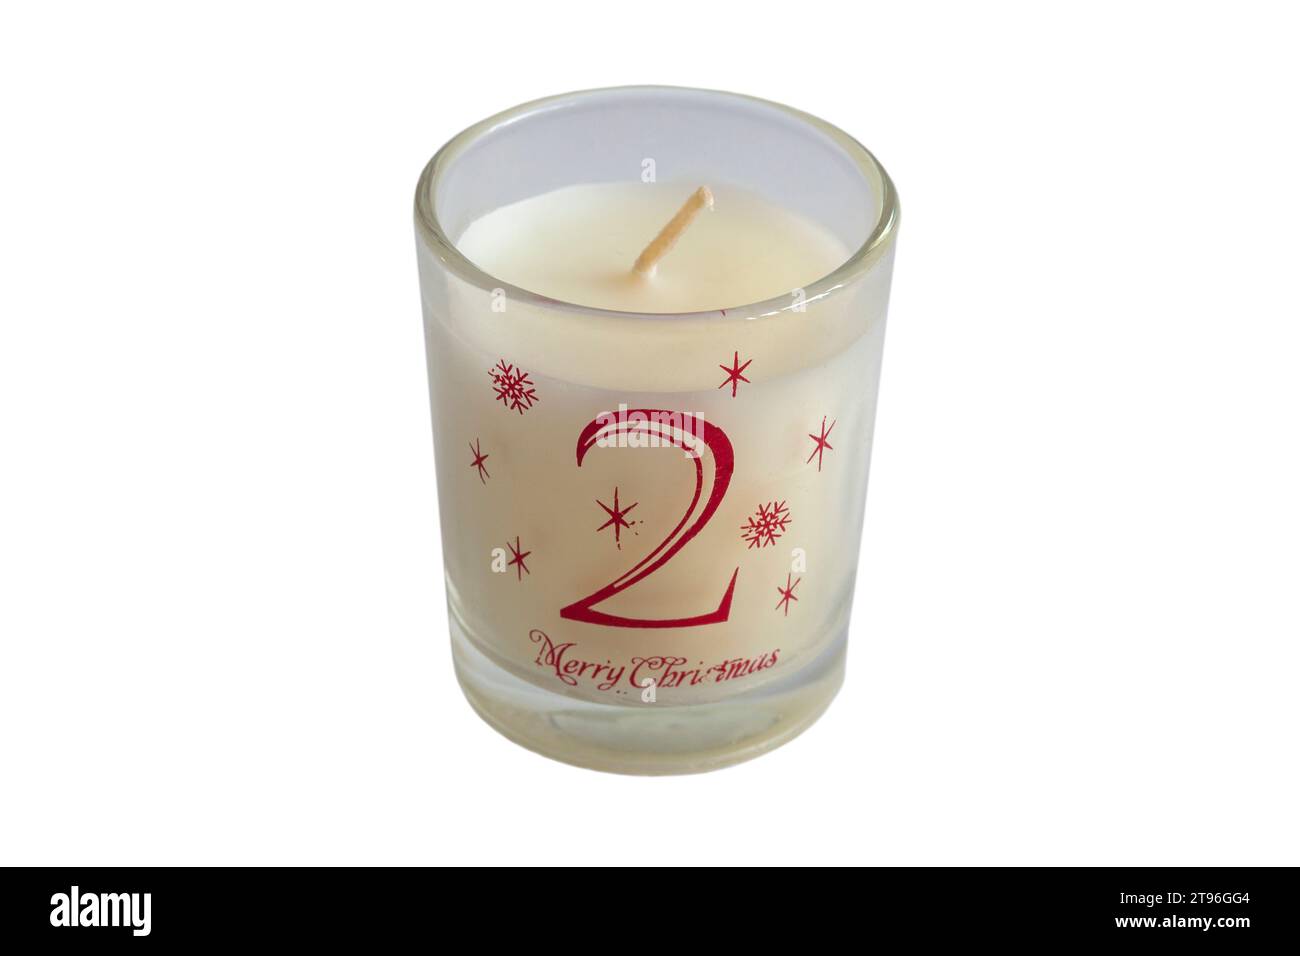 votive candle number 2 two from 12 days of Christmas votive candles set isolated on white background - Merry Christmas Stock Photo